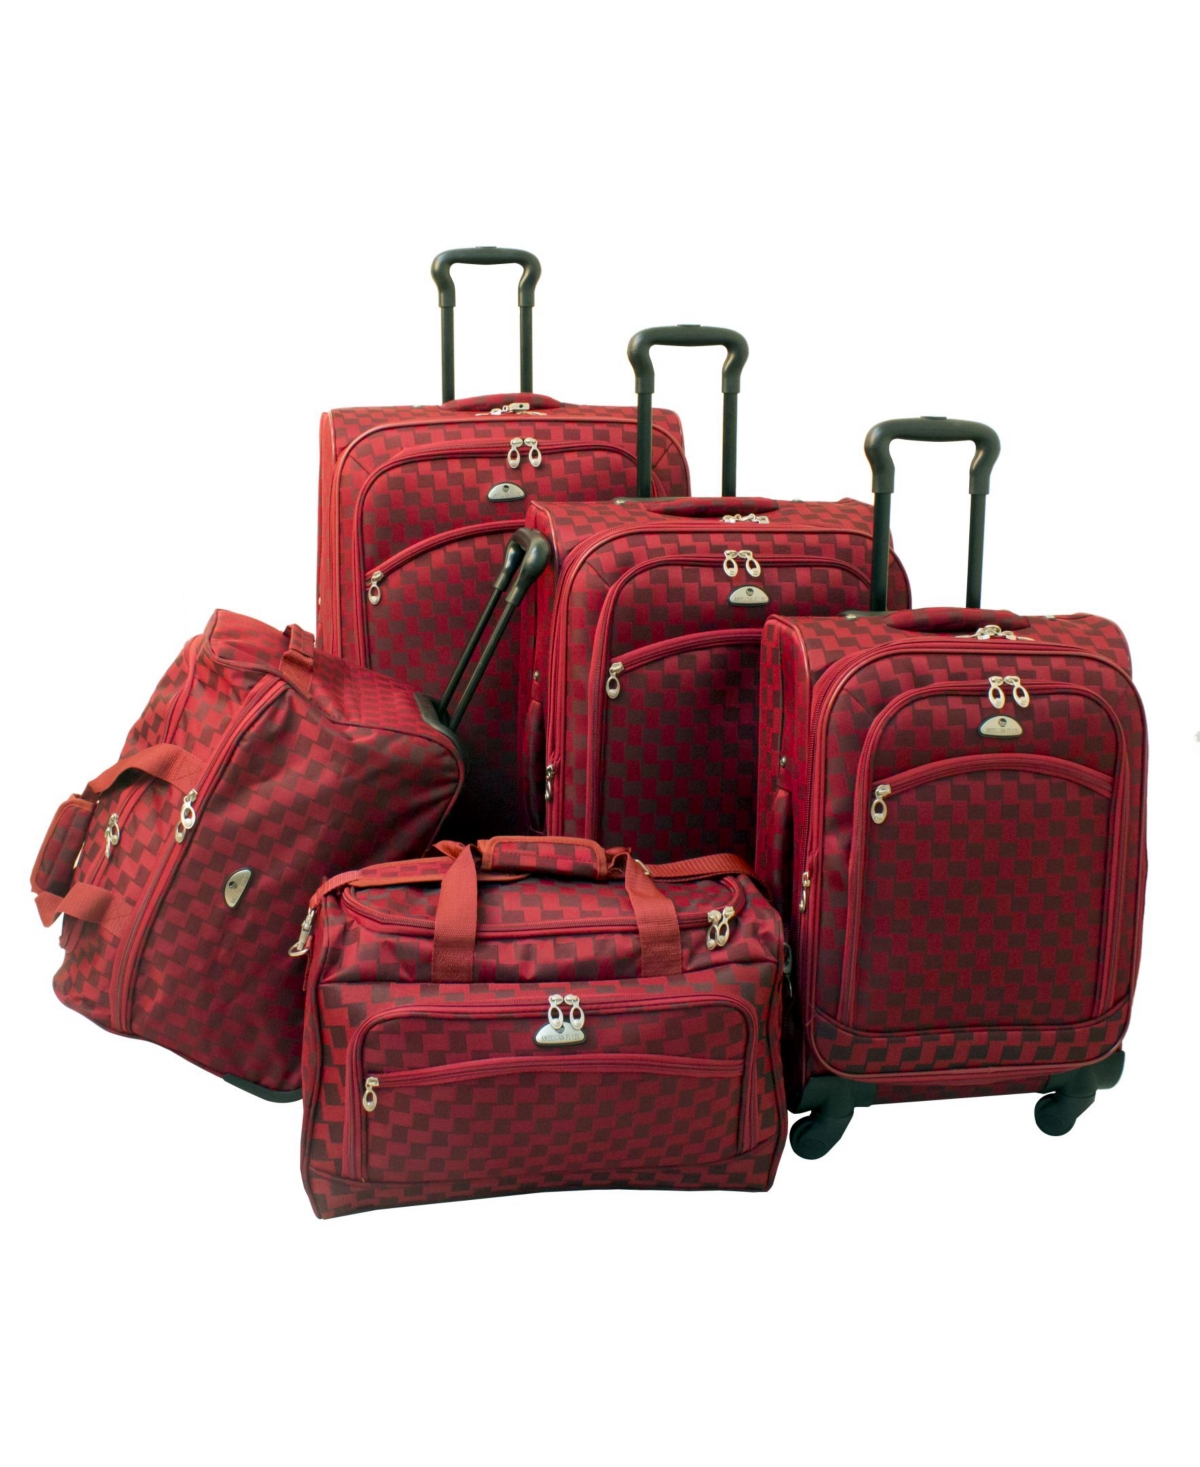 Madrid 5 Piece Spinner Luggage Set - Red